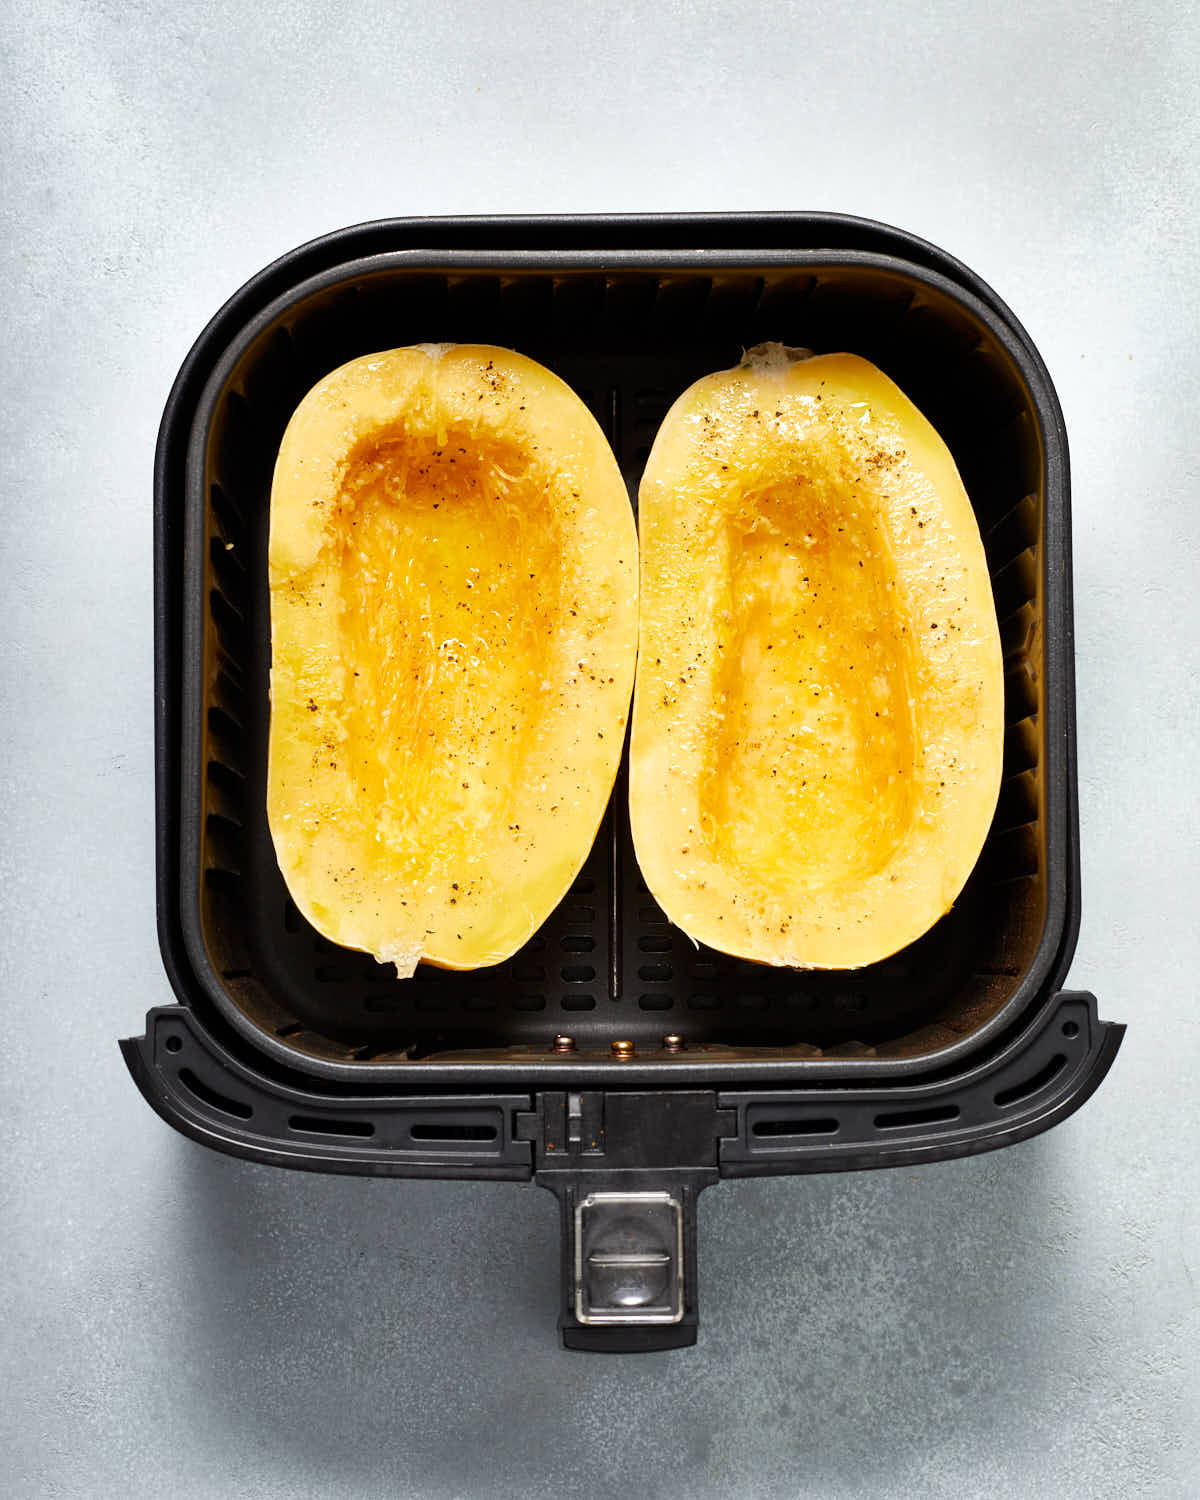 Squash halves with oil and seasonings arranged cut side up in the air fryer basket.